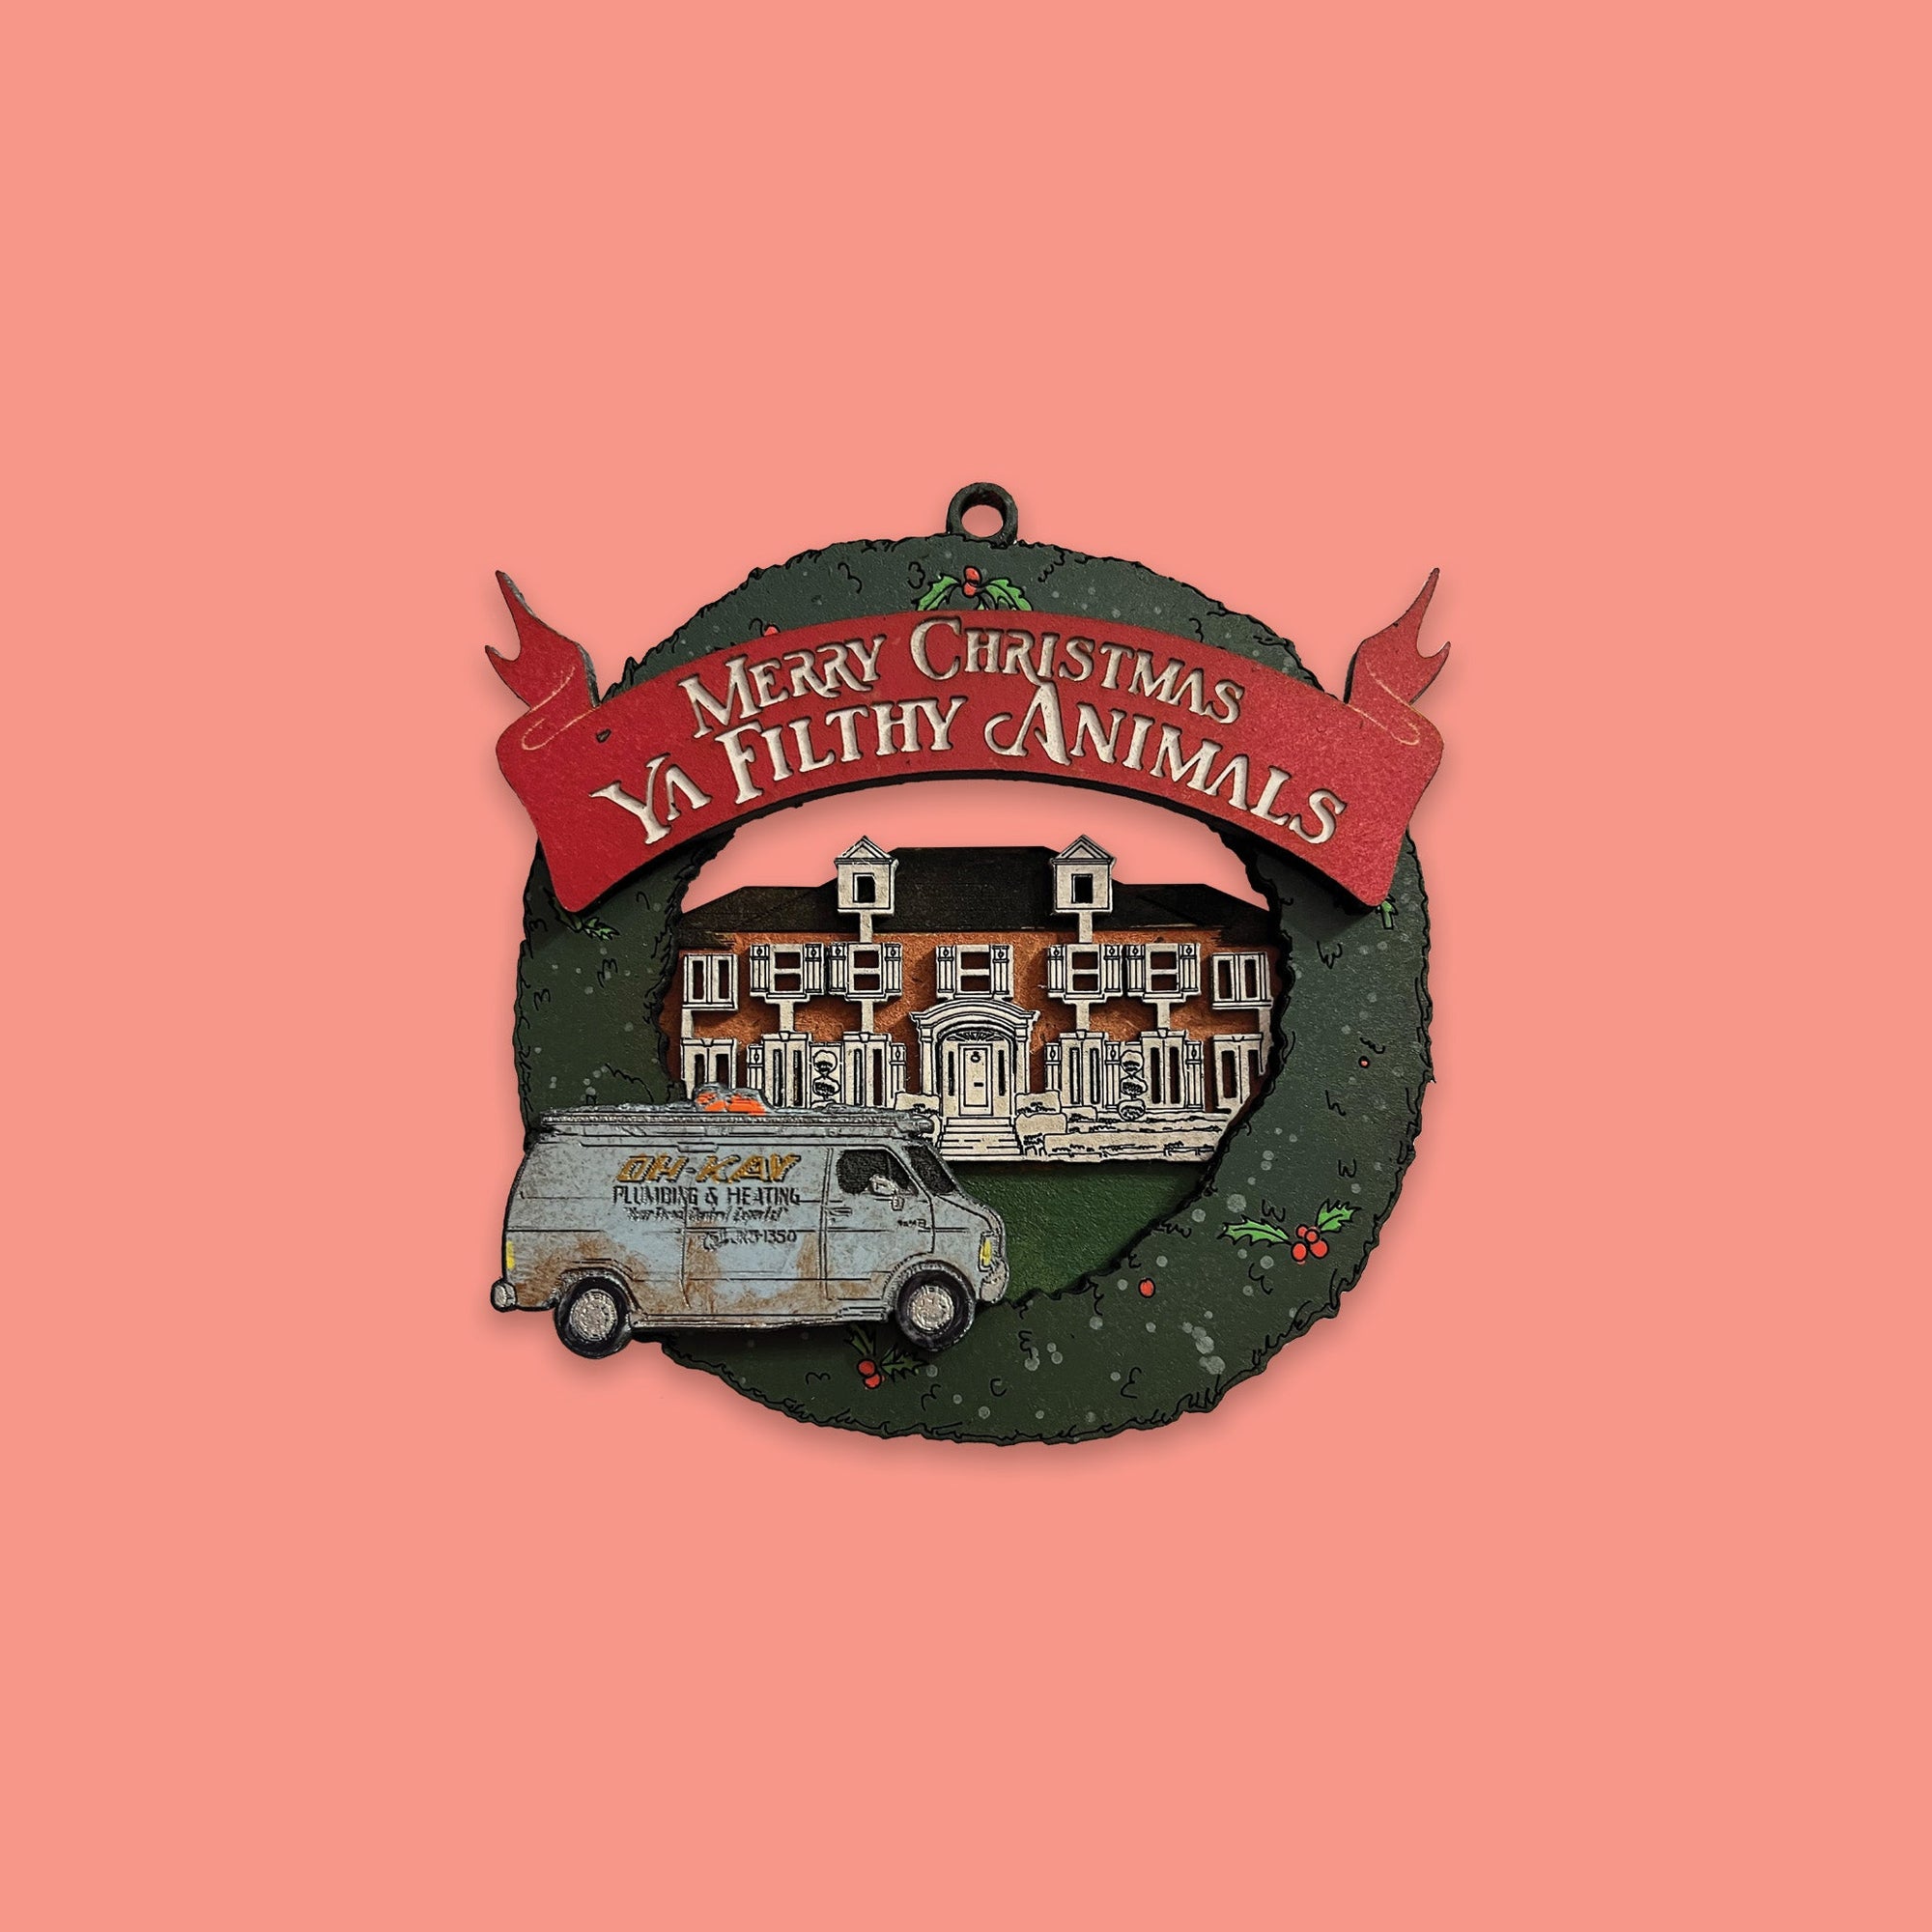 On a coral pink background sits a wreath ornament. This Home Alone inspired wood ornament is a green wreath with Kevin McAllister's house and the blue OH-KAY PLUMBING AND HEATING in front ot it. At the top is a red banner that says "MERRY CHRISTMAS YA FILTHY ANIMALS" in white lettering.